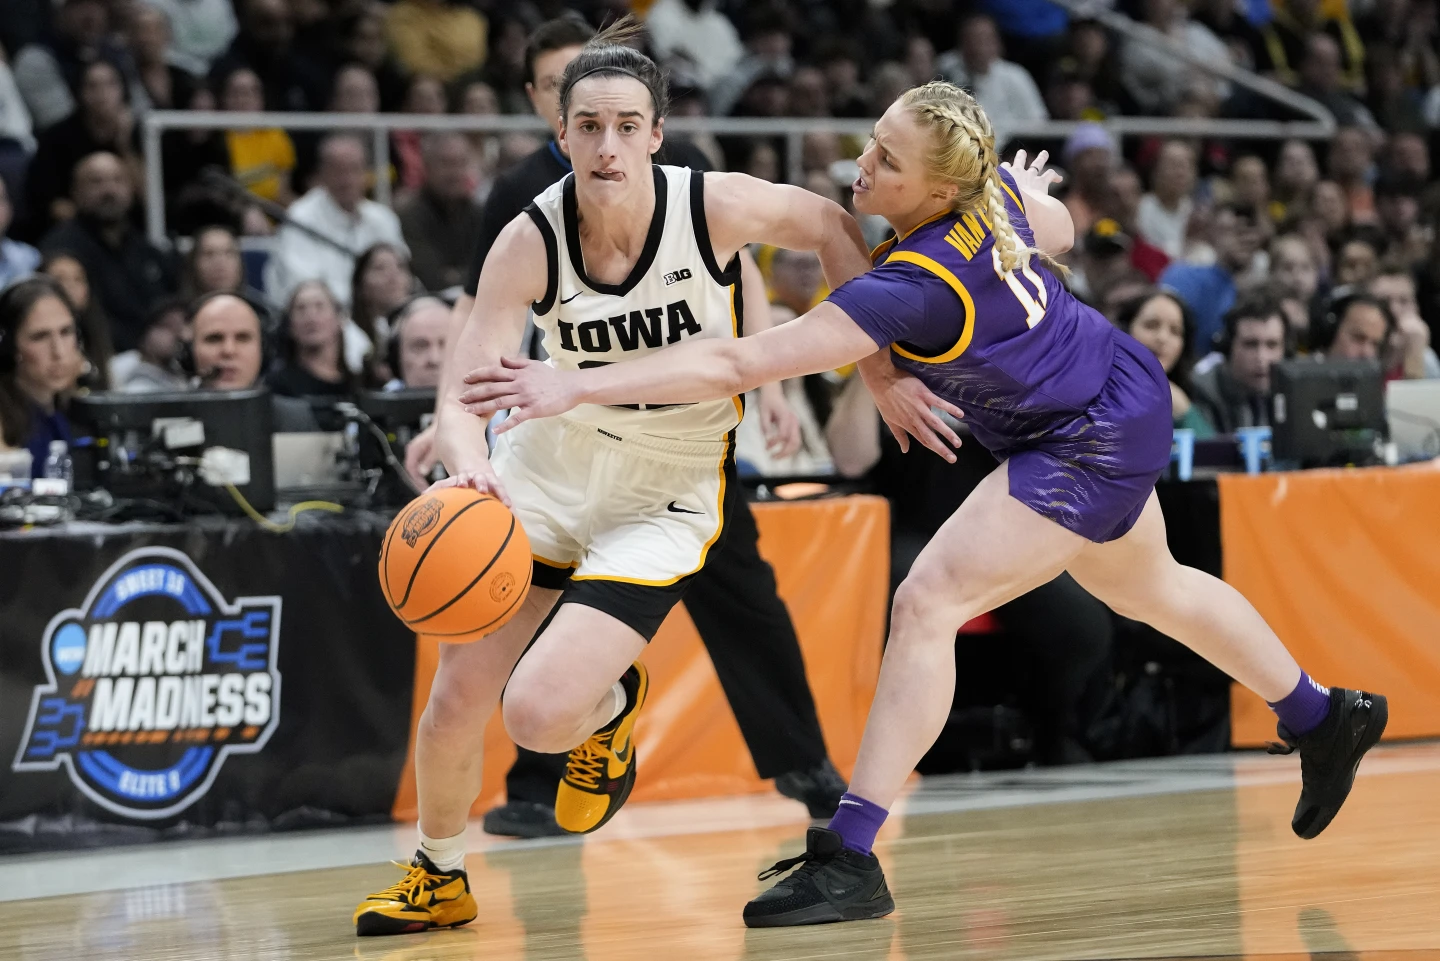 12.3 million: Iowa’s victory over LSU is the most-watched women’s college basketball game on record